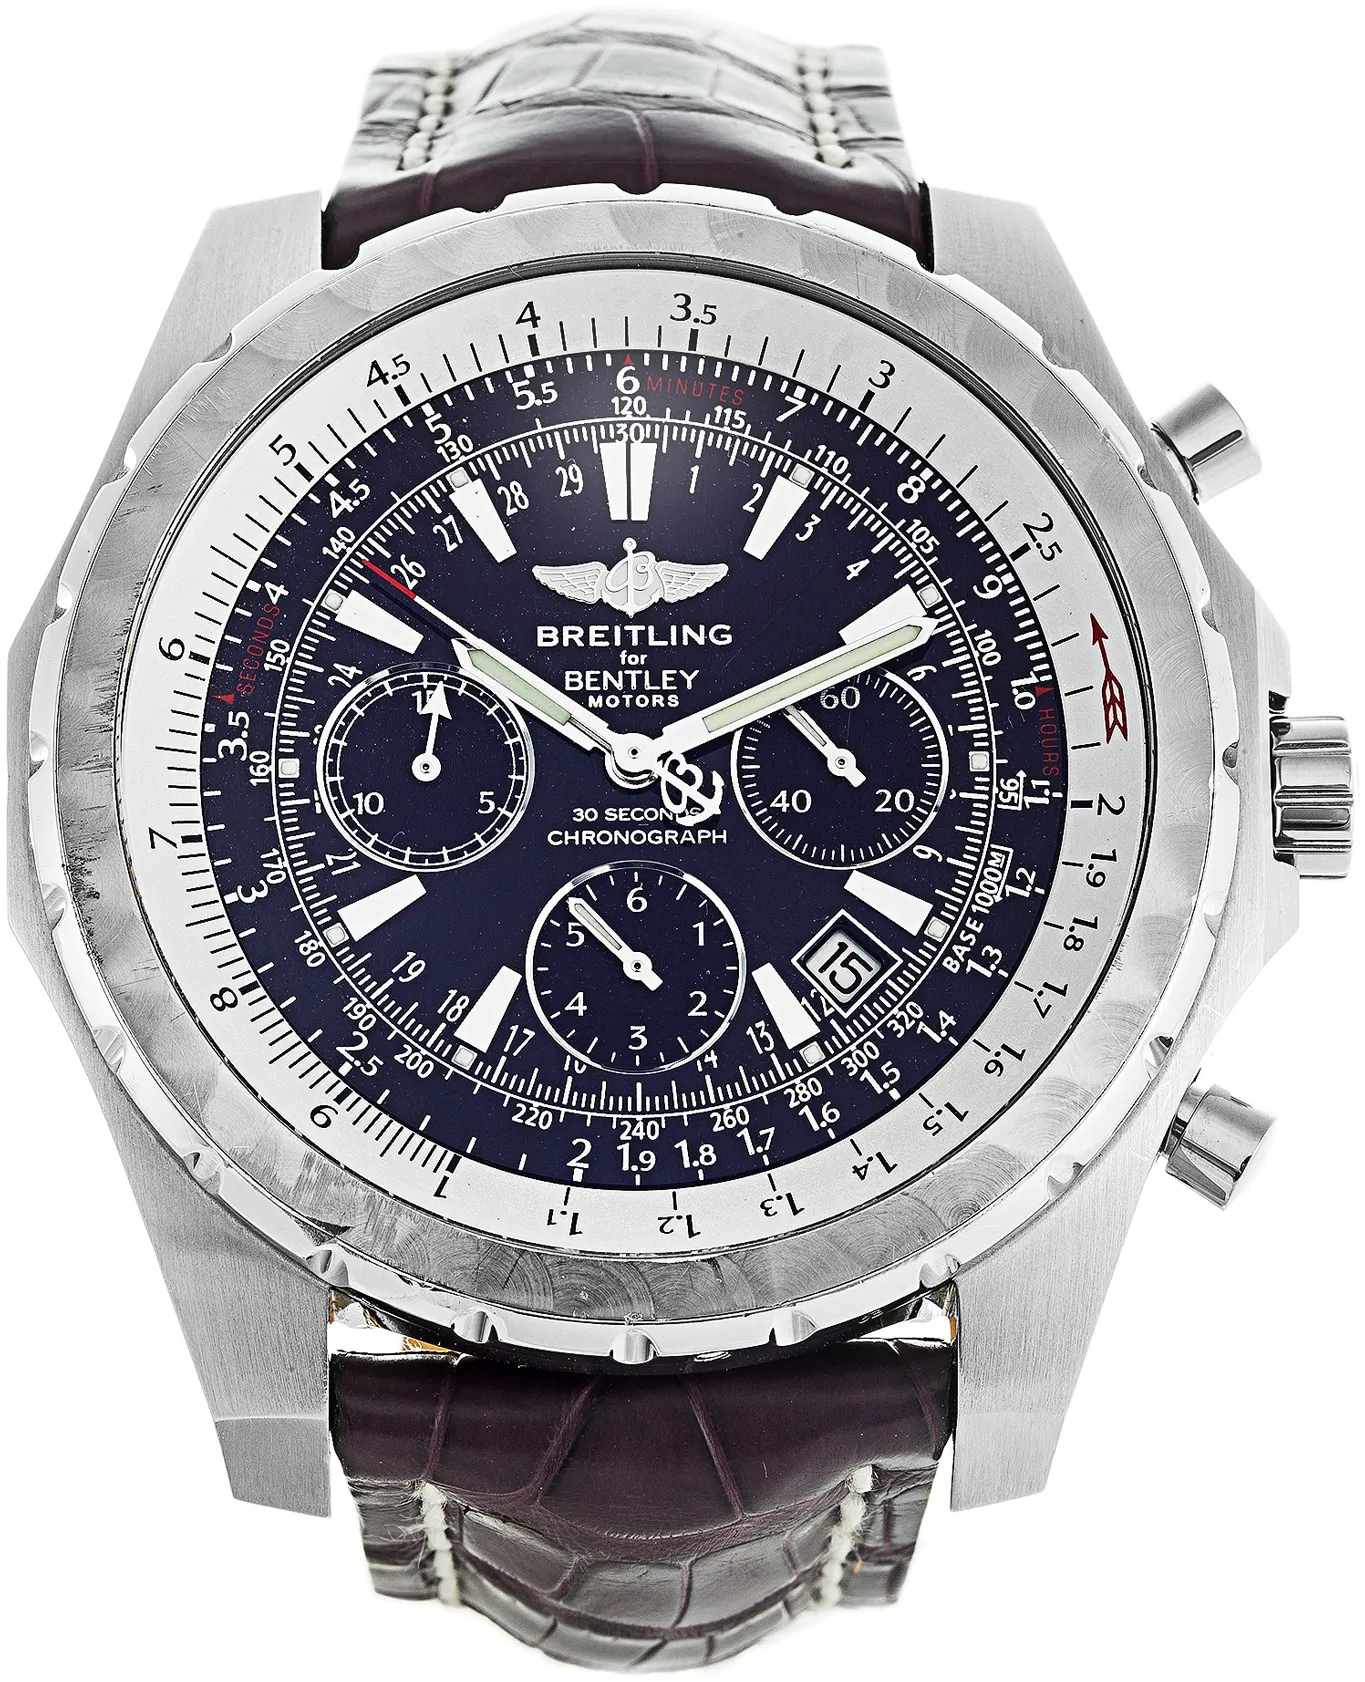 Breitling Bentley A25363 49mm Stainless steel •